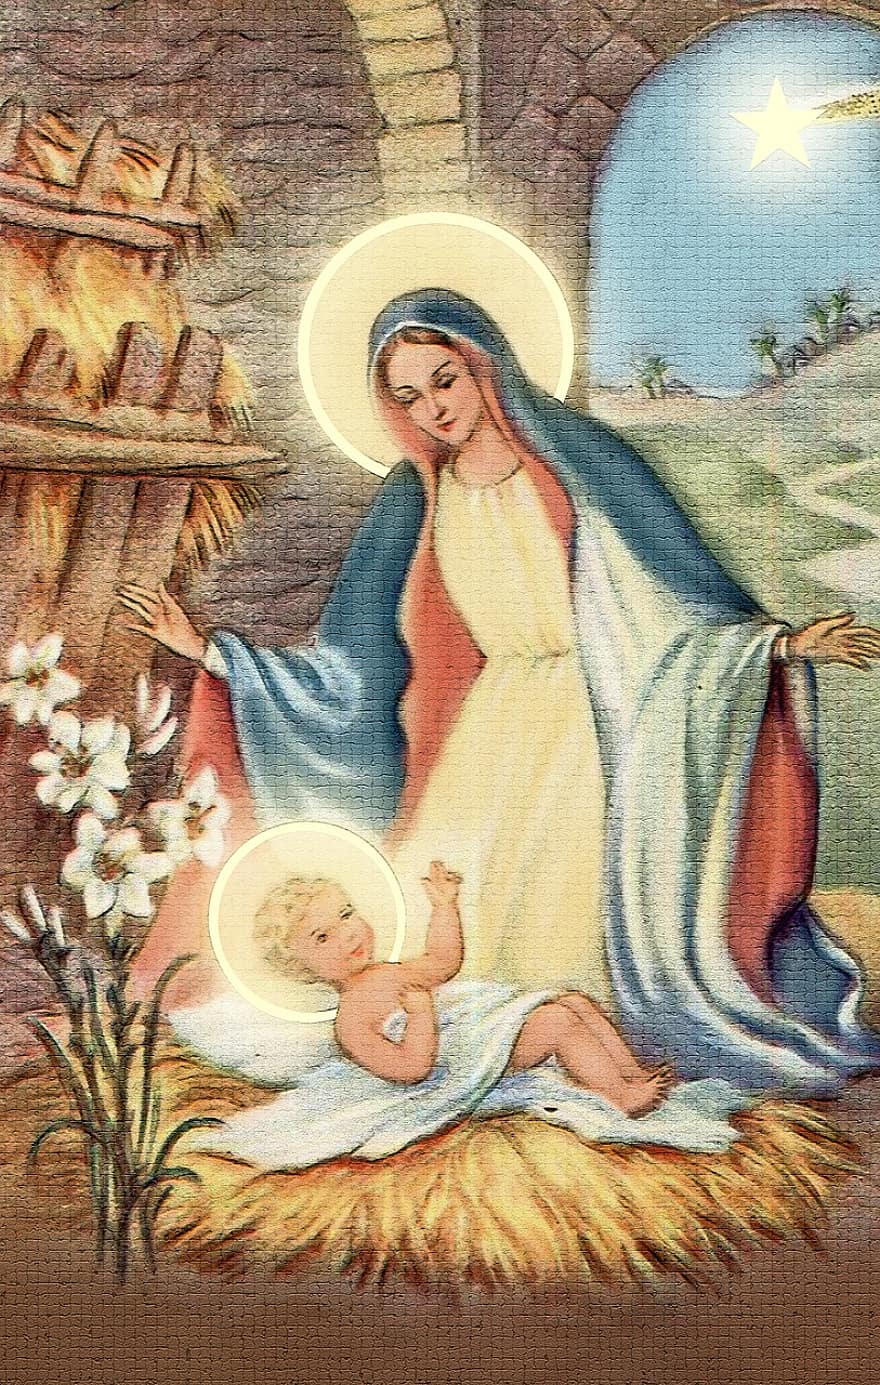 Christmas Card, Mary And Baby Jesus, Manger, Card, Mary, Christmas, Holidays, Scrapbooking, Design, Greetings, Nativity